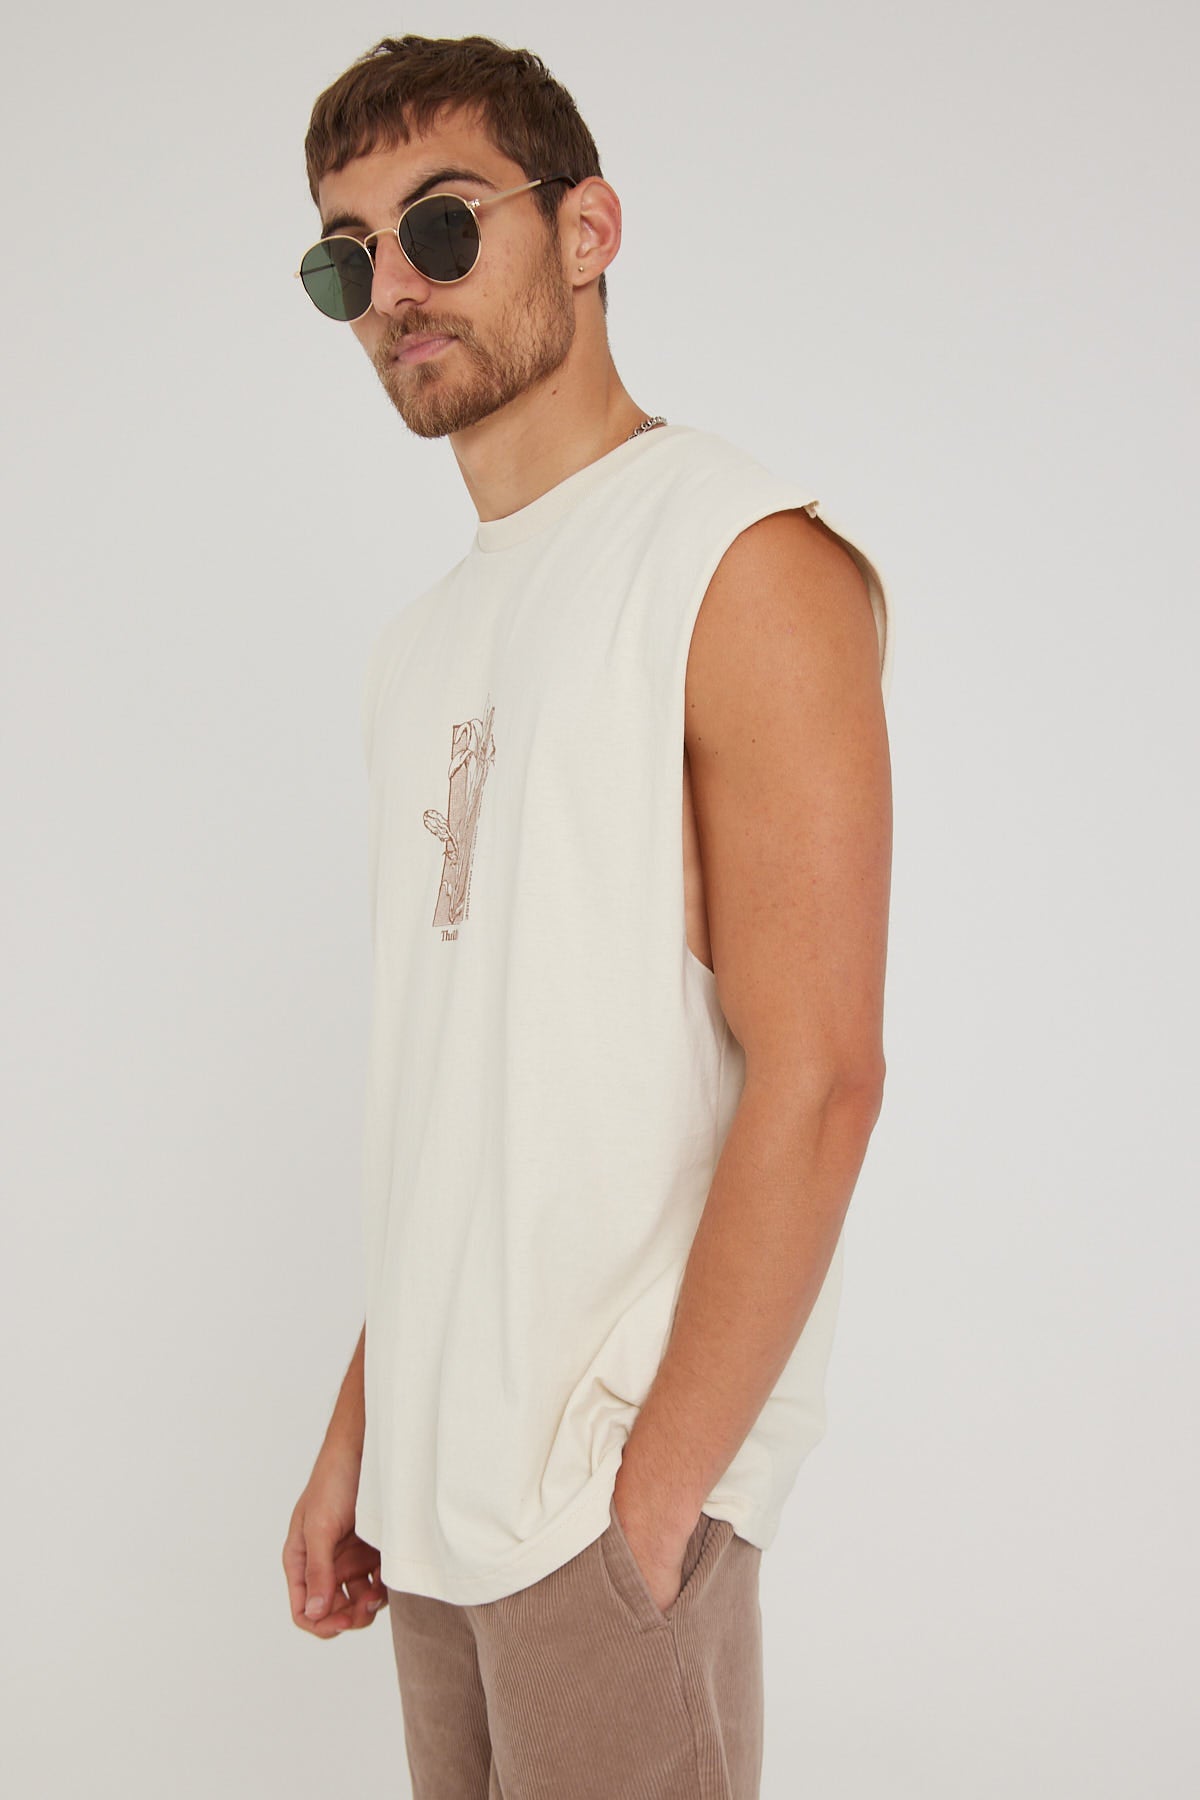 Thrills Paradise Lily Merch Fit Muscle Tee Heritage White